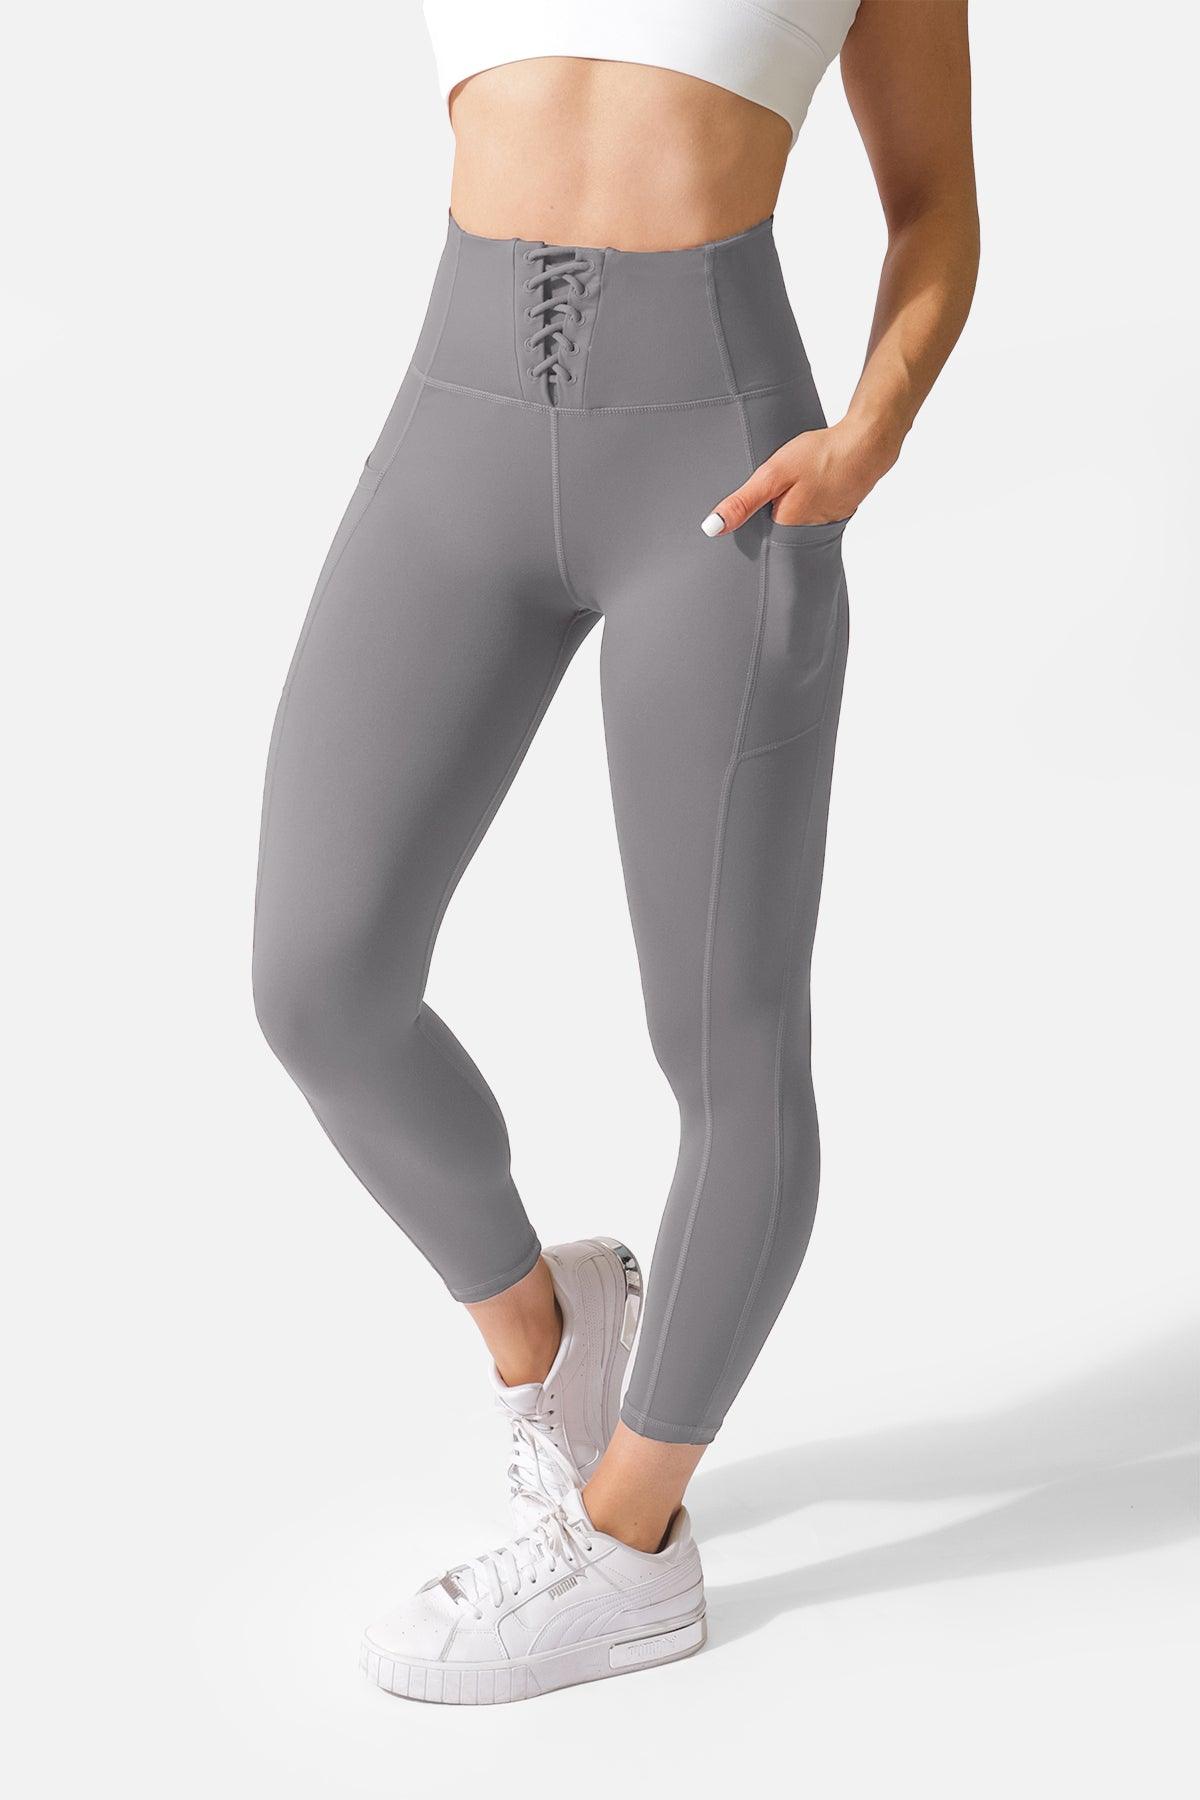 Lacey Pocket Leggings - Gray - Jed North Canada